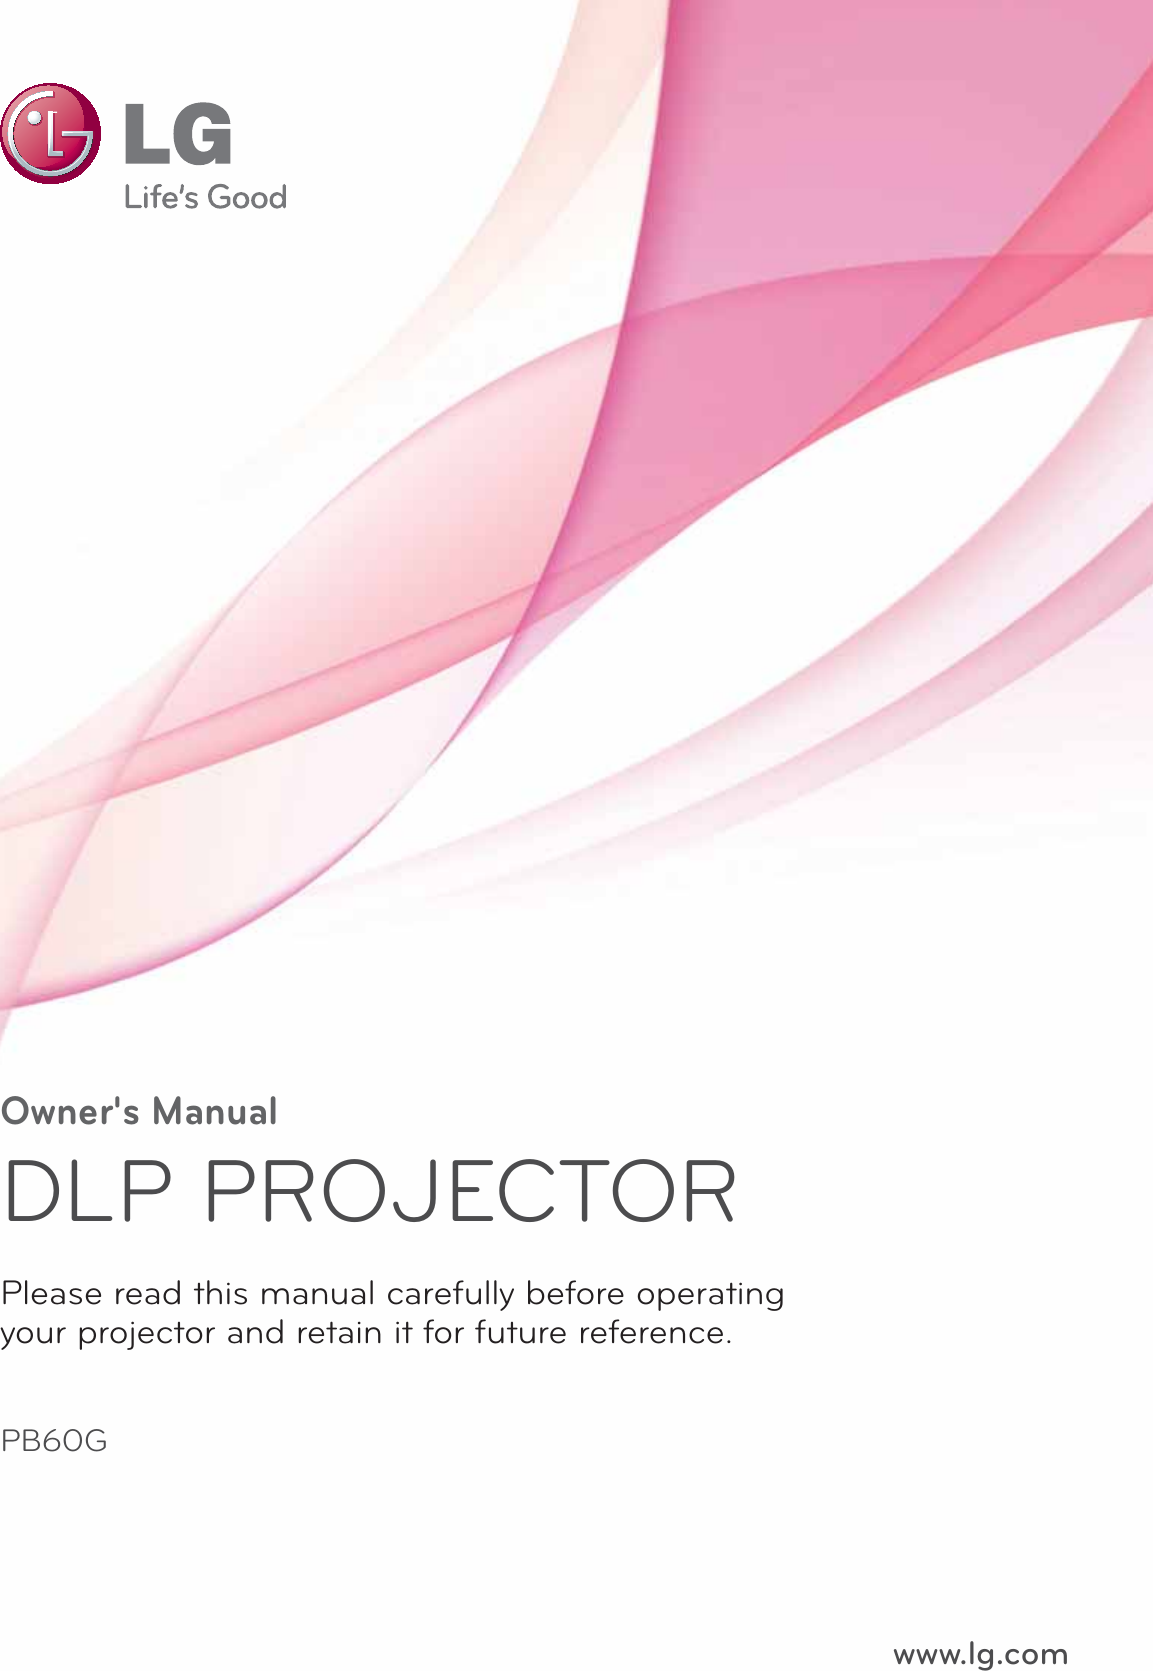 Owner&apos;s ManualDLP PROJECTORPB60GPlease read this manual carefully before operatingyour projector and retain it for future reference.www.lg.com